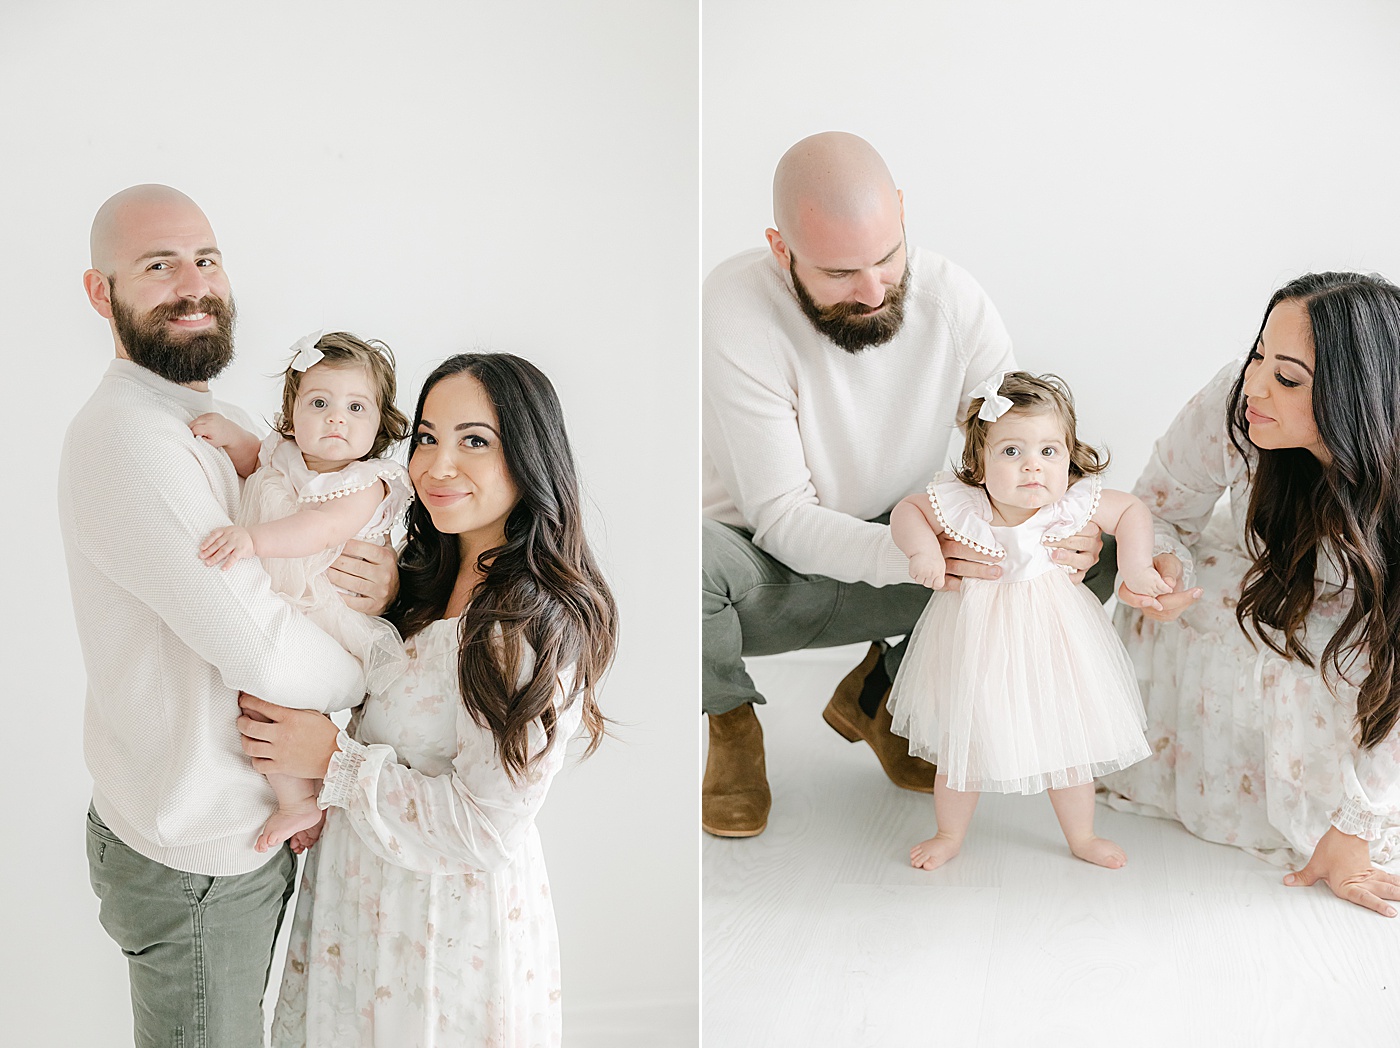 Family photos during 6 month milestone session for daughter in Westport studio with Kristin Wood Photography.